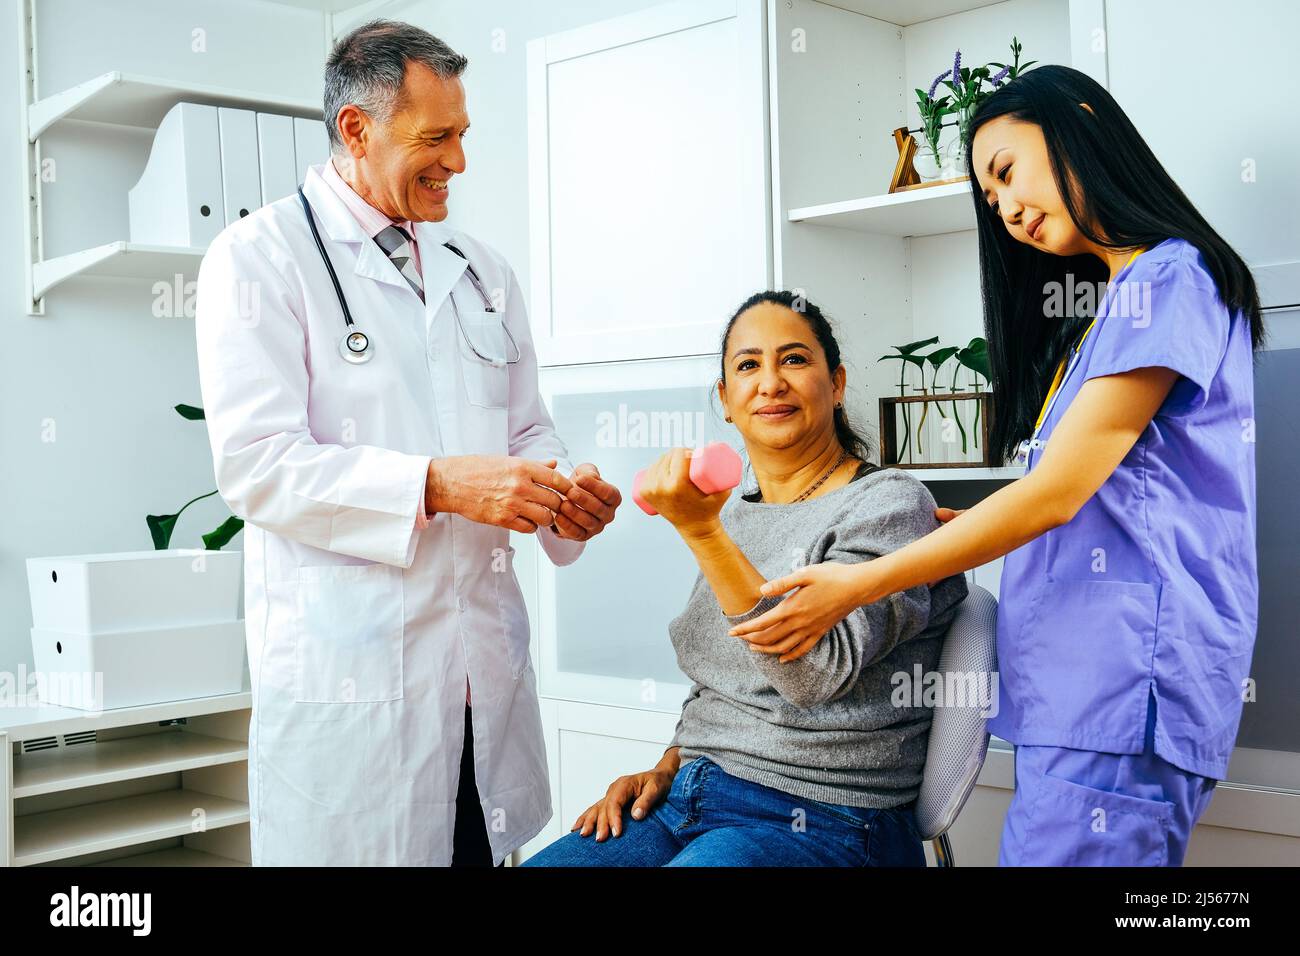 rehabilitation doctor physiotherapist physician and nurse practitioner helping patient lift dumbbell with one hand. Healthcare industry clinic Stock Photo